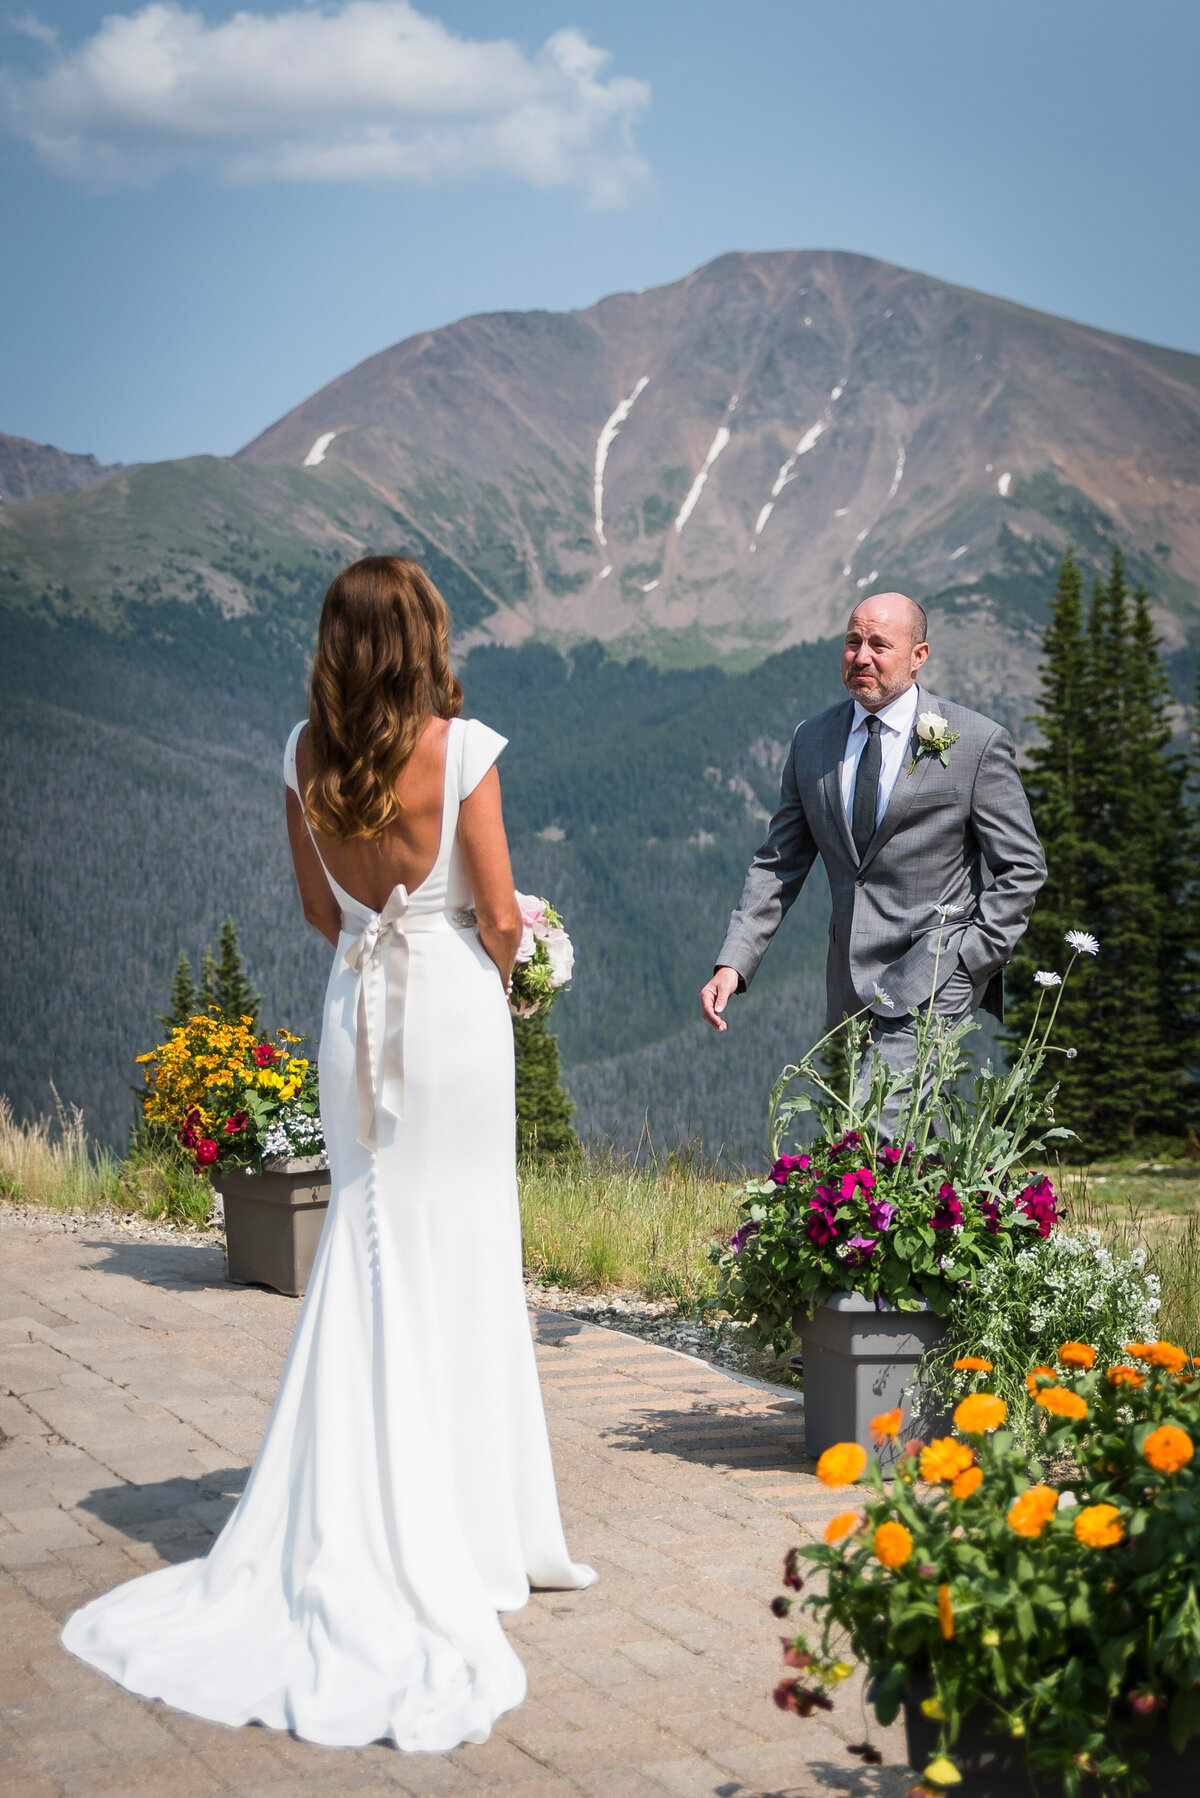 A groom reacts emotionally as he sees his bride for the first time with a mountain landscape in the background.